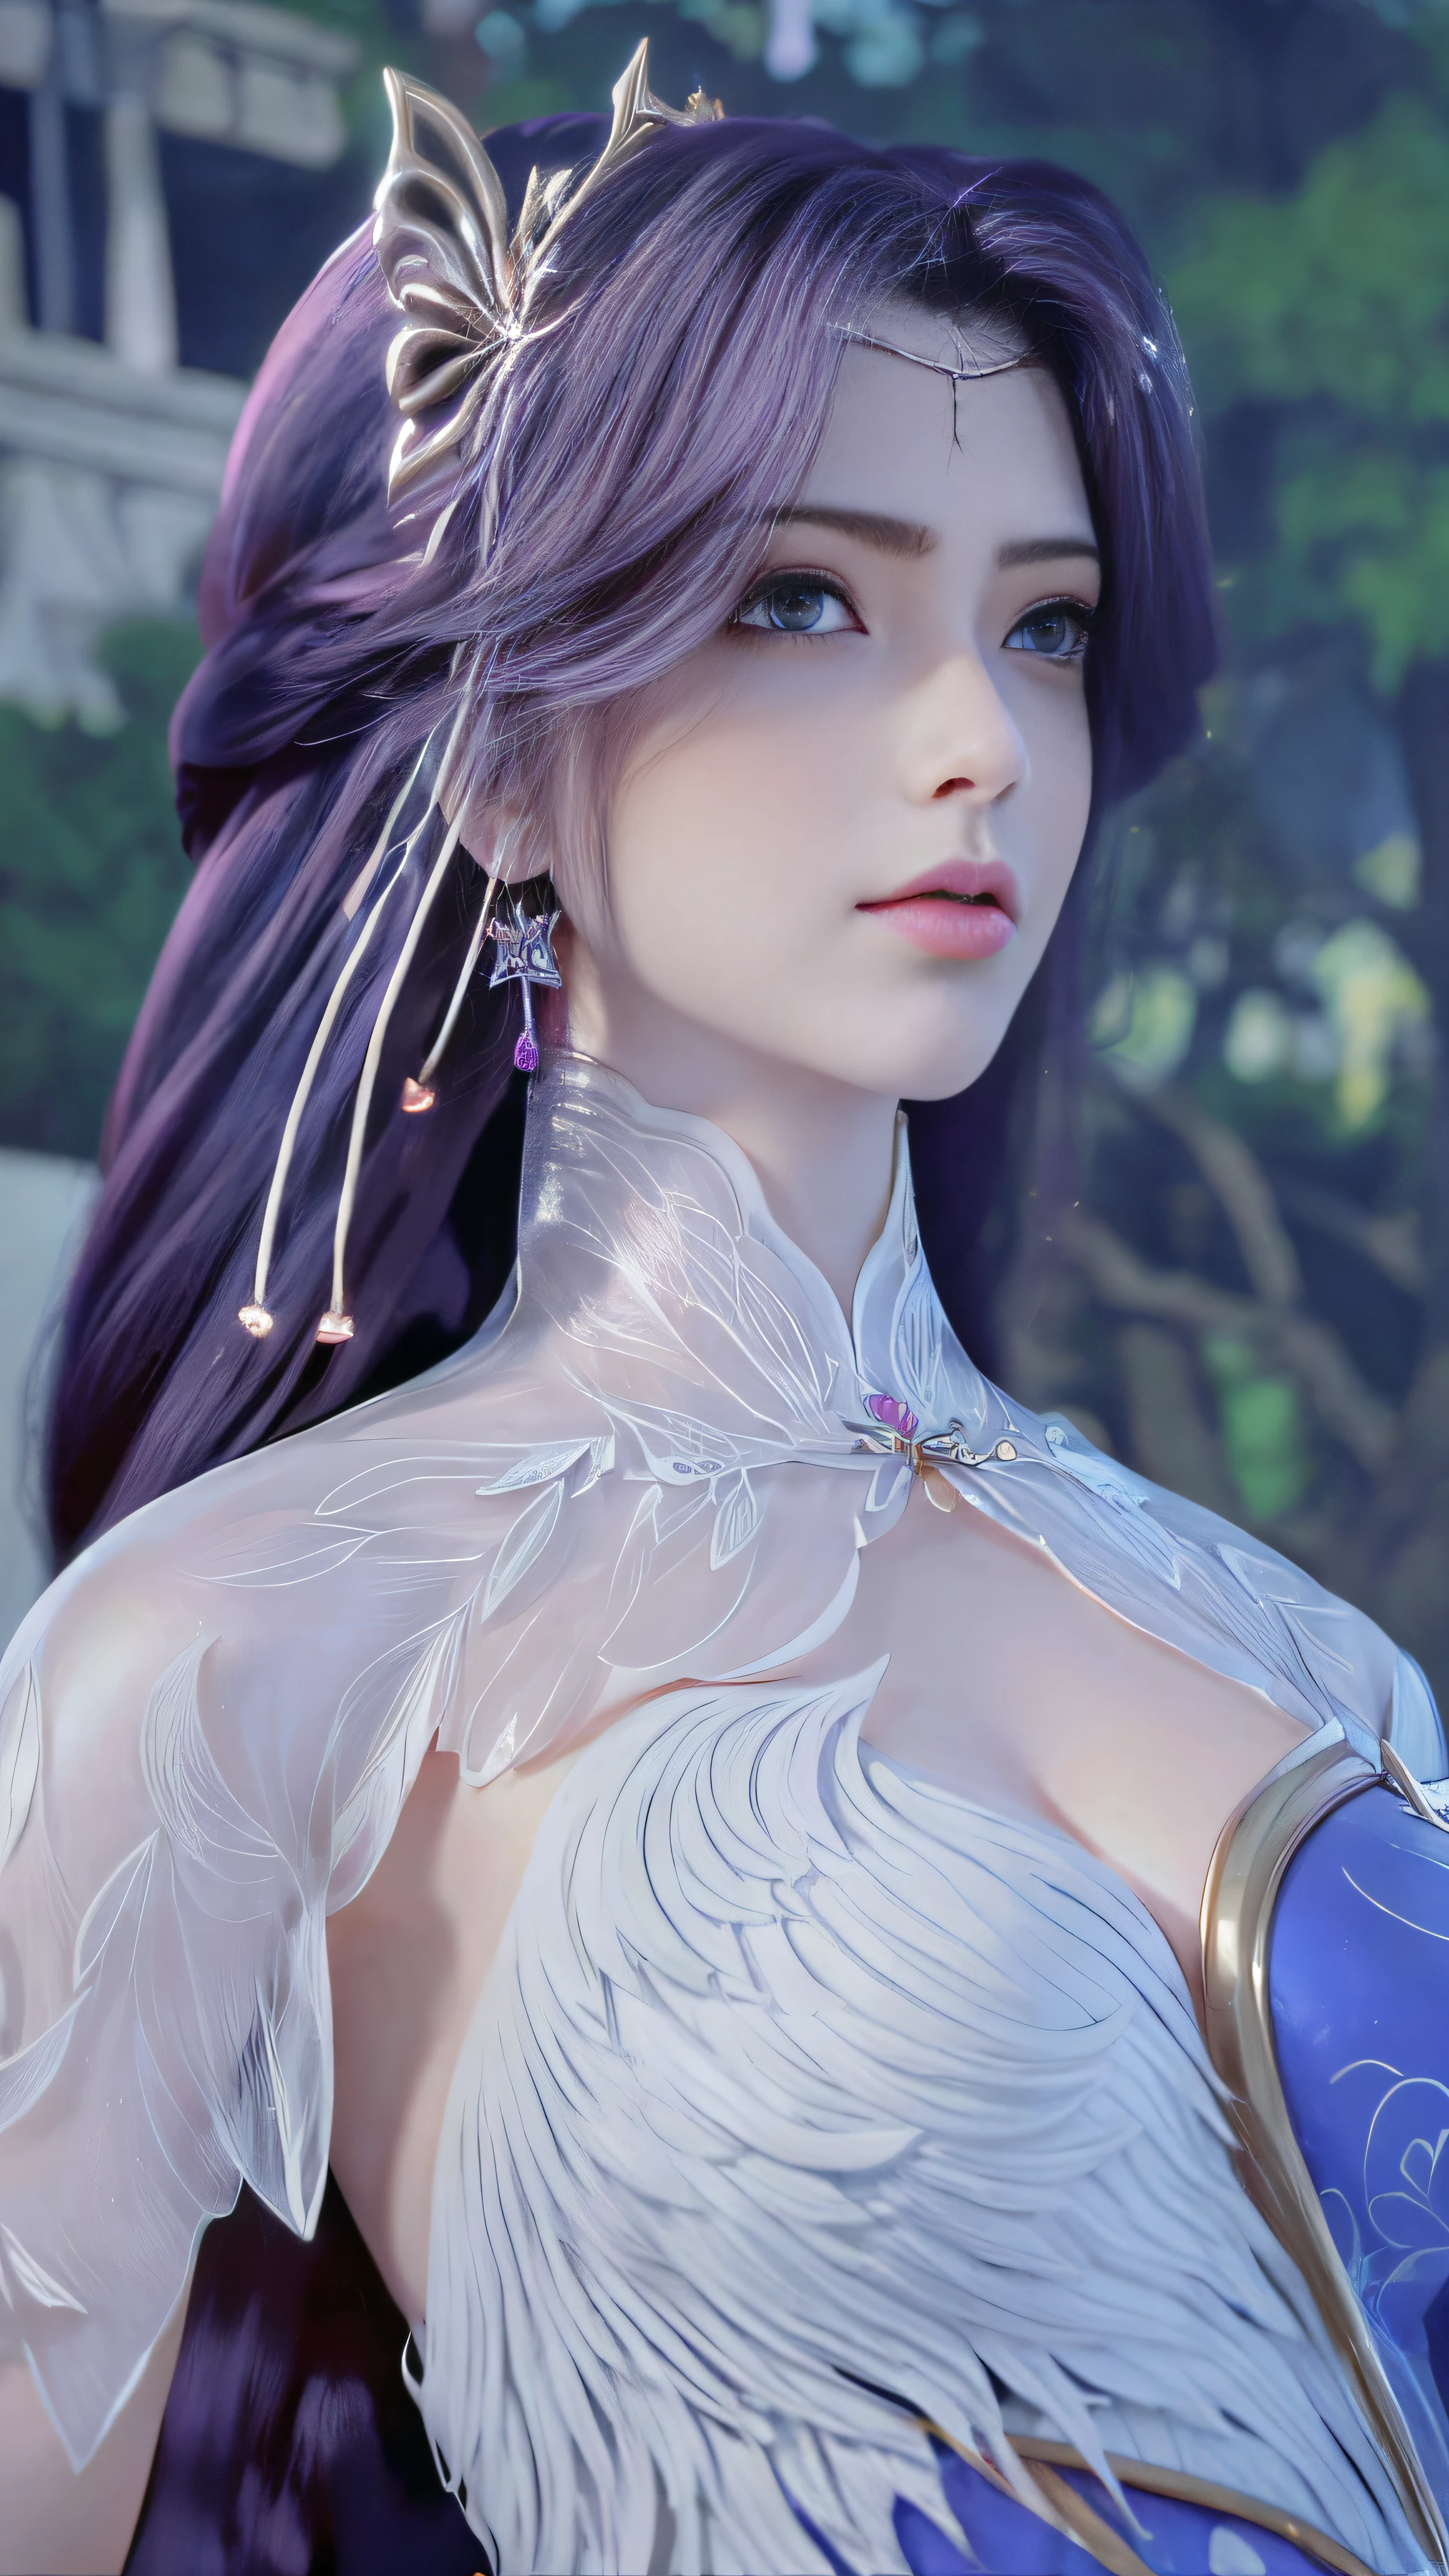 Close-up of a woman in a red dress and gold jewelry，Royal Sister，Superb beauty，a queen，Beautiful and elegant queen, portrait of a queen,  Xianxia, a beautiful fantasy empress, xianxia fantasy, Beautiful young wind spirit, inspired by Li Mei-shu, ((a beautiful fantasy empress)), xianxia hero, 3 d anime realistic, full-body xianxia, Smooth anime CG art